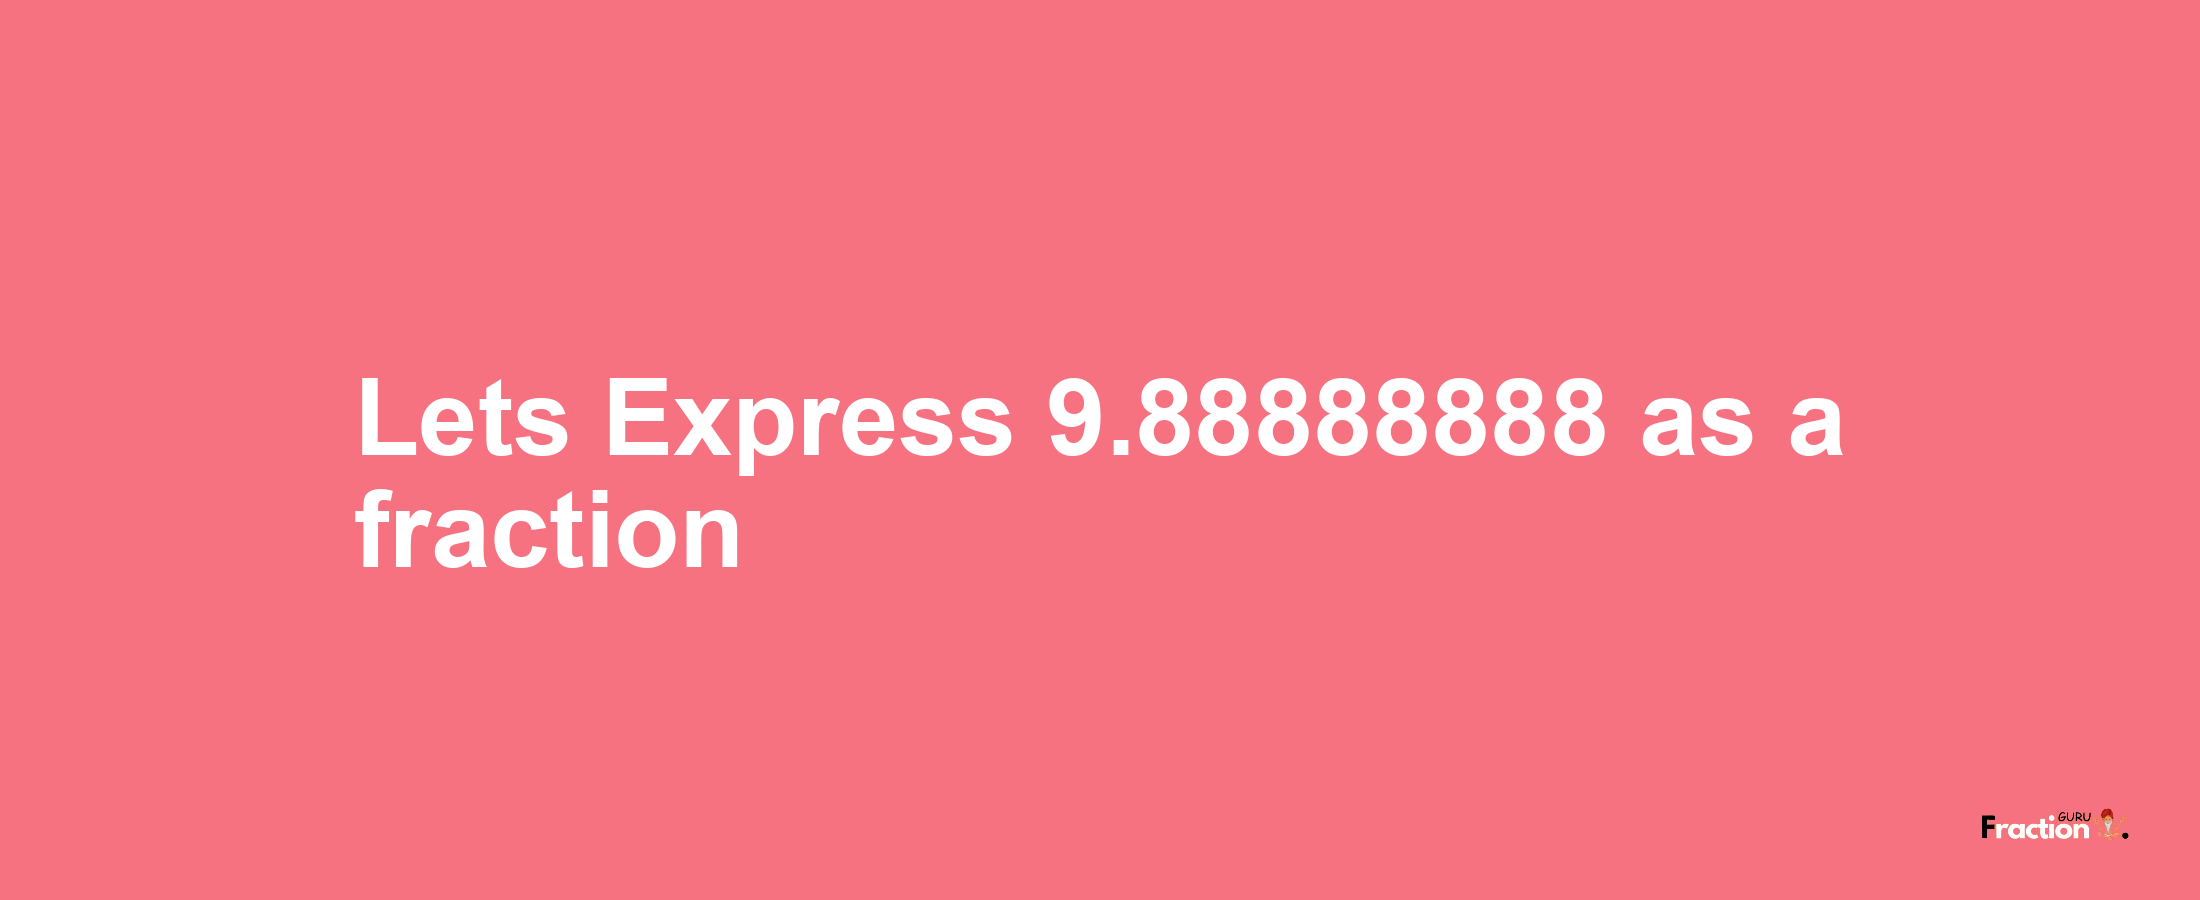 Lets Express 9.88888888 as afraction